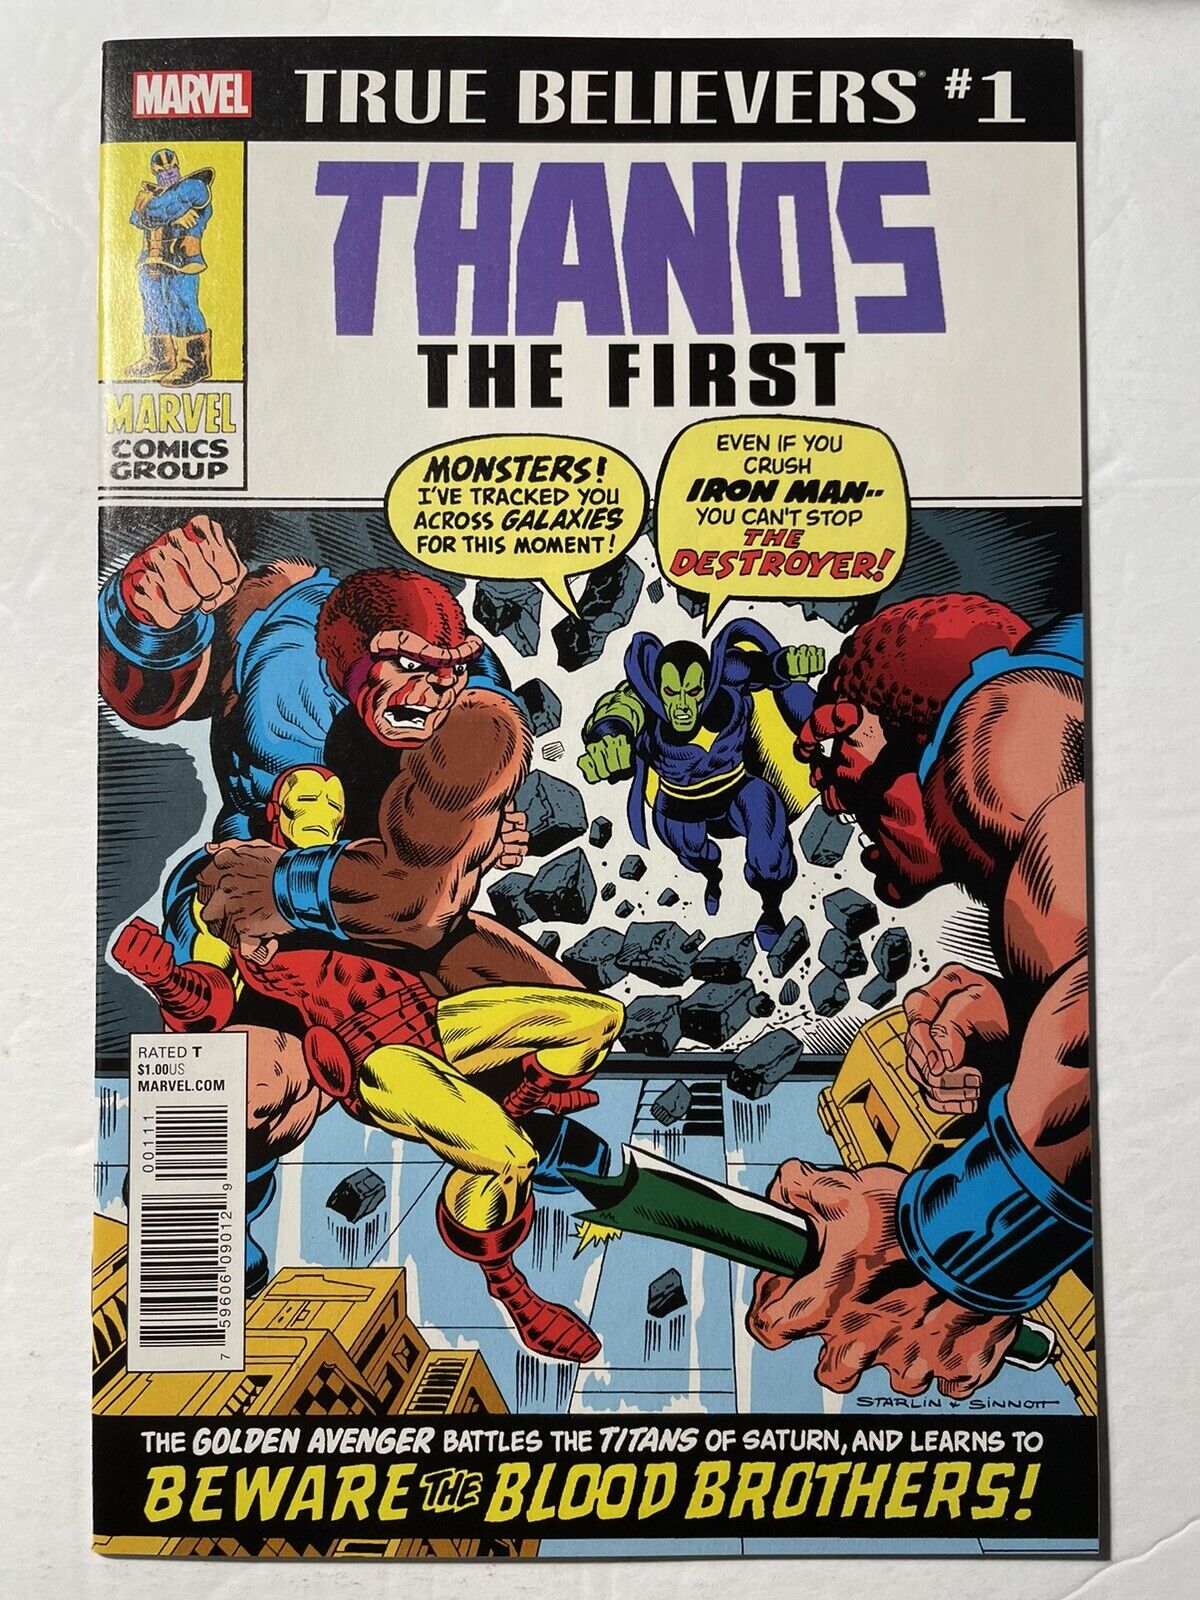 True Believers: Thanos the First #1 (Marvel, June 2018)